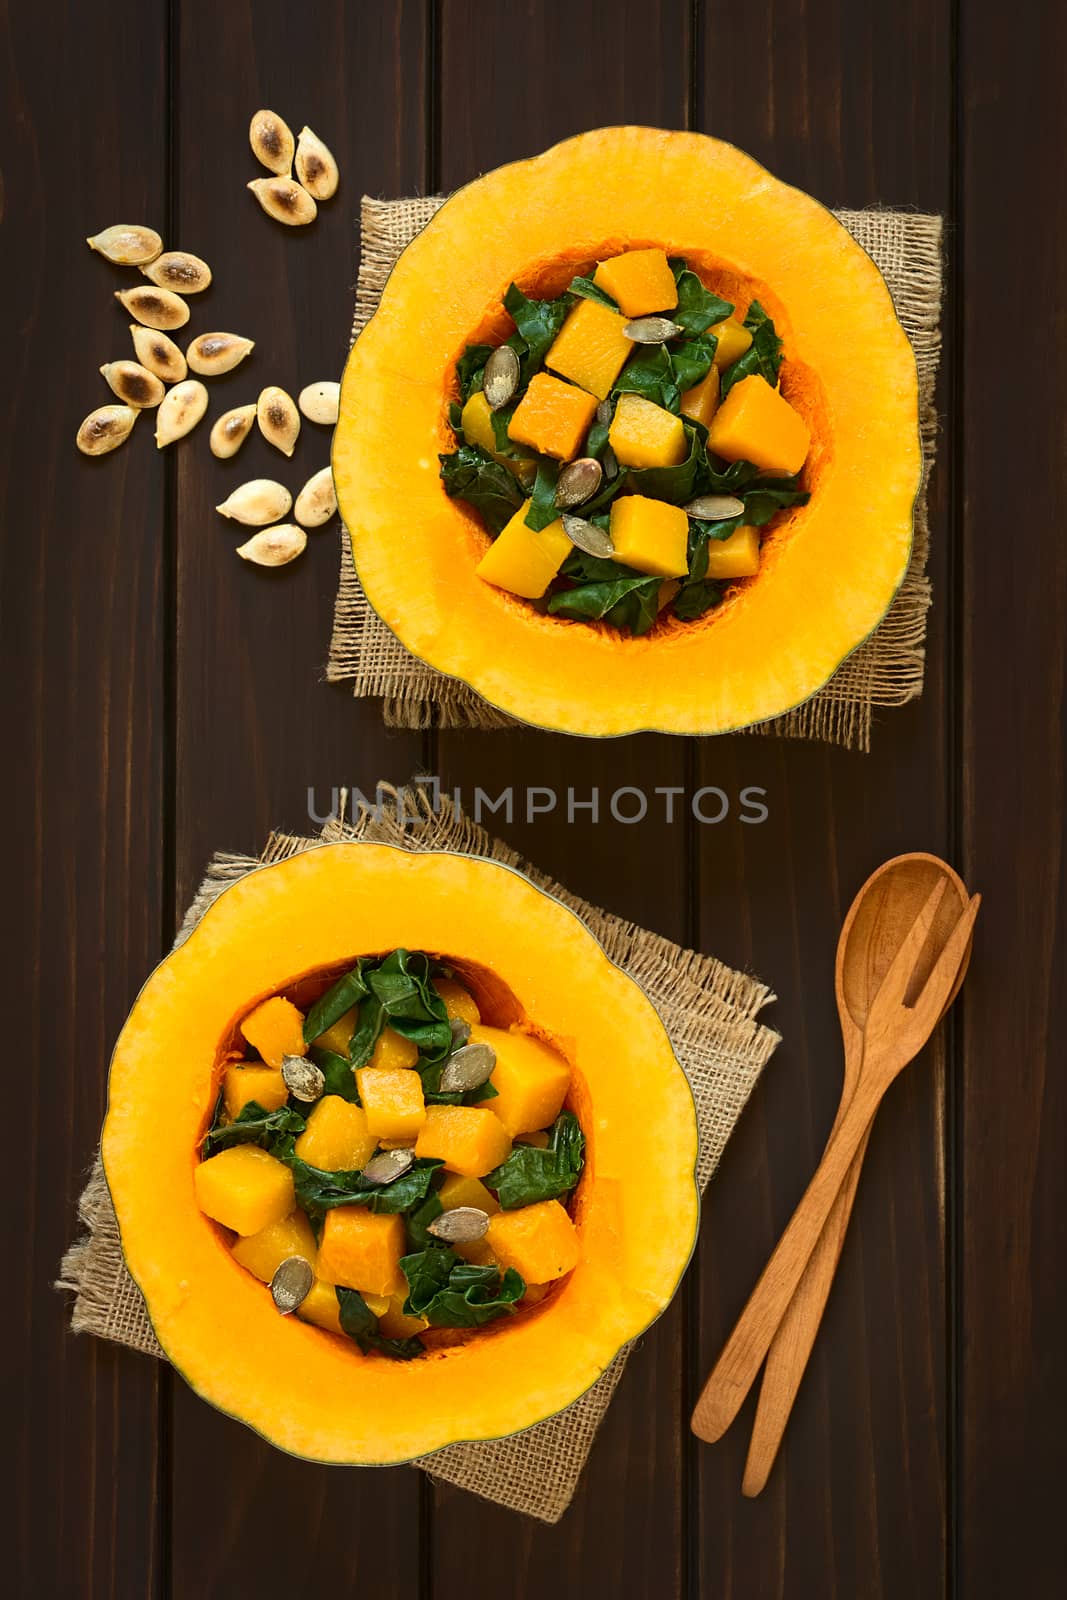 Pumpkin and chard salad with roasted pumpkin seeds served in pumpkin halves, photographed overhead on dark wood with natural light  